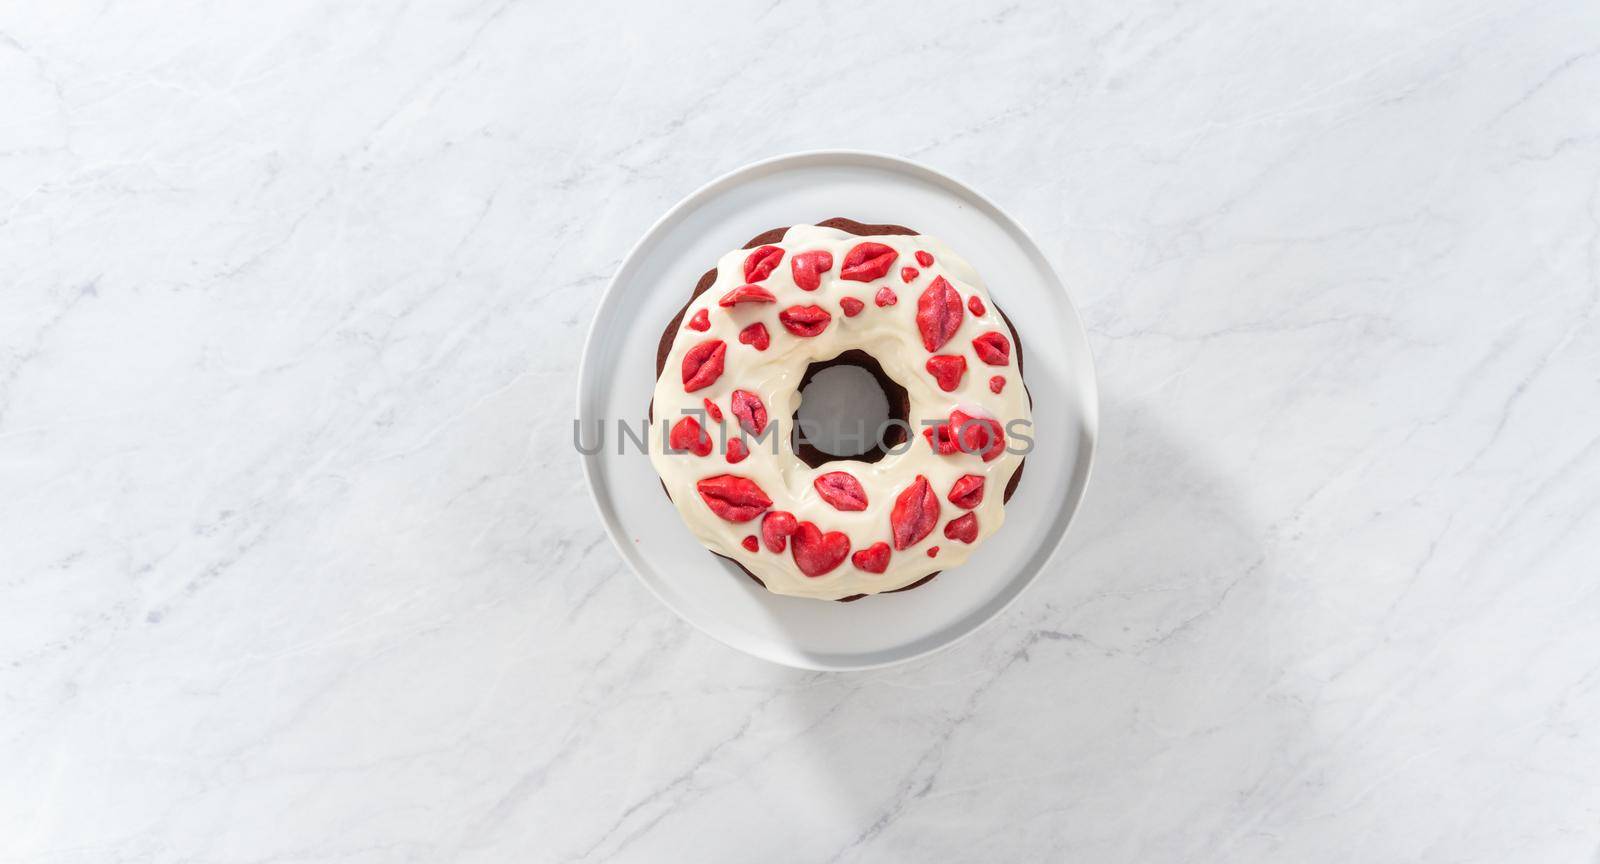 Flat lay. Decorating red velvet bundt cake with chocolate lips and hearts over cream cheese glaze.